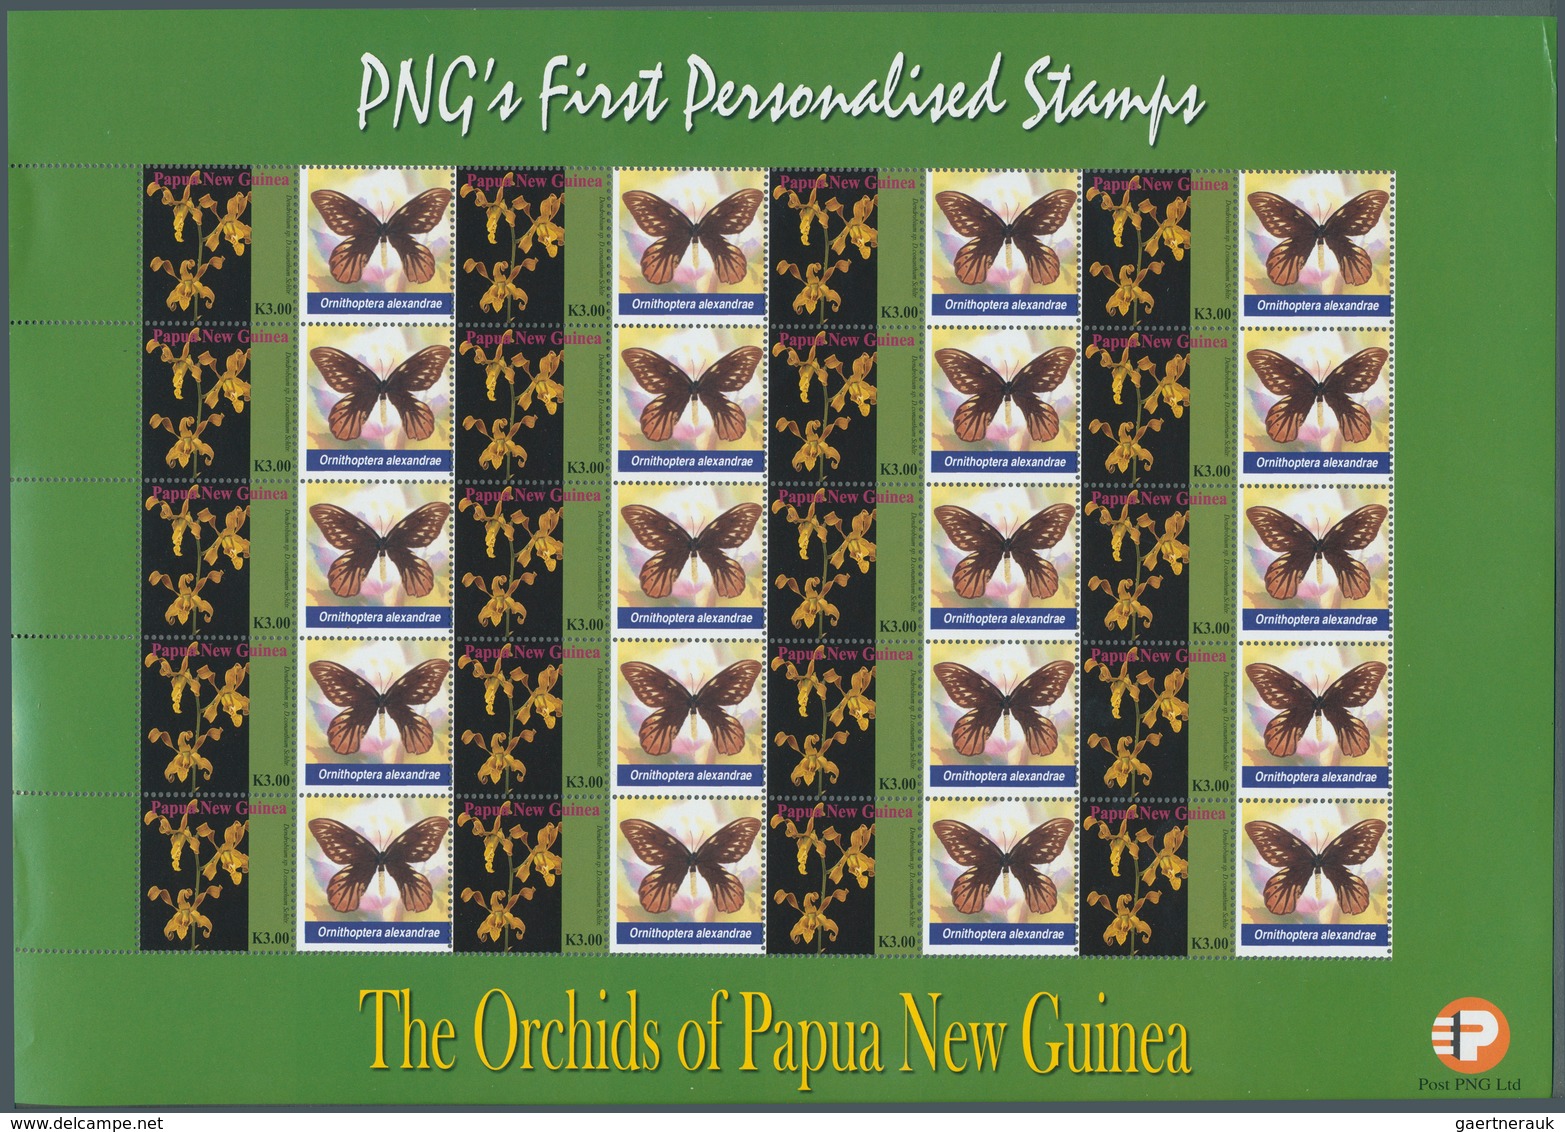 23843 Papua Neuguinea: 2007, so called PERSONALIZED STAMPS over 5,000 sheets mint never hinged, attractive